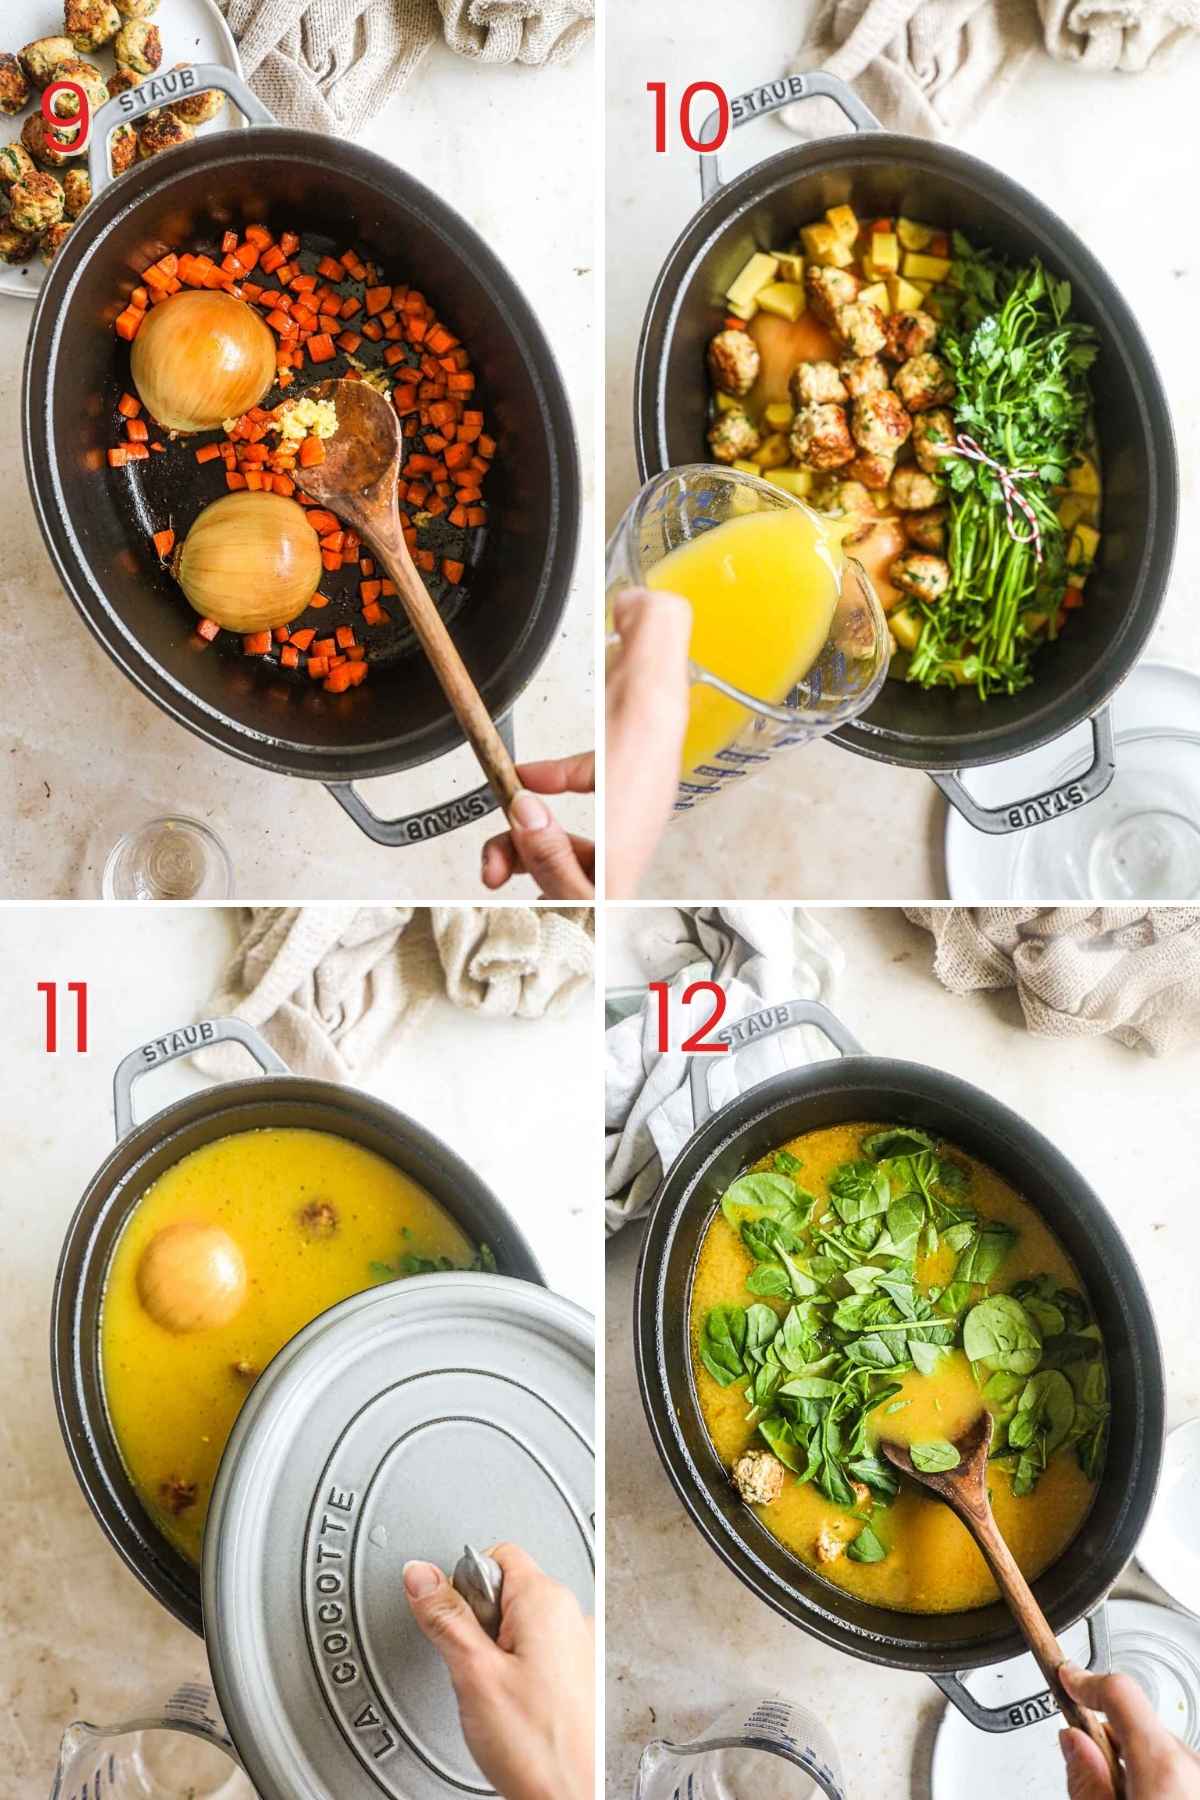 Steps to make chicken meatball soup, including adding the garlic, parsley, meatballs, and chicken stock, then simmering and adding spinach until wilted.